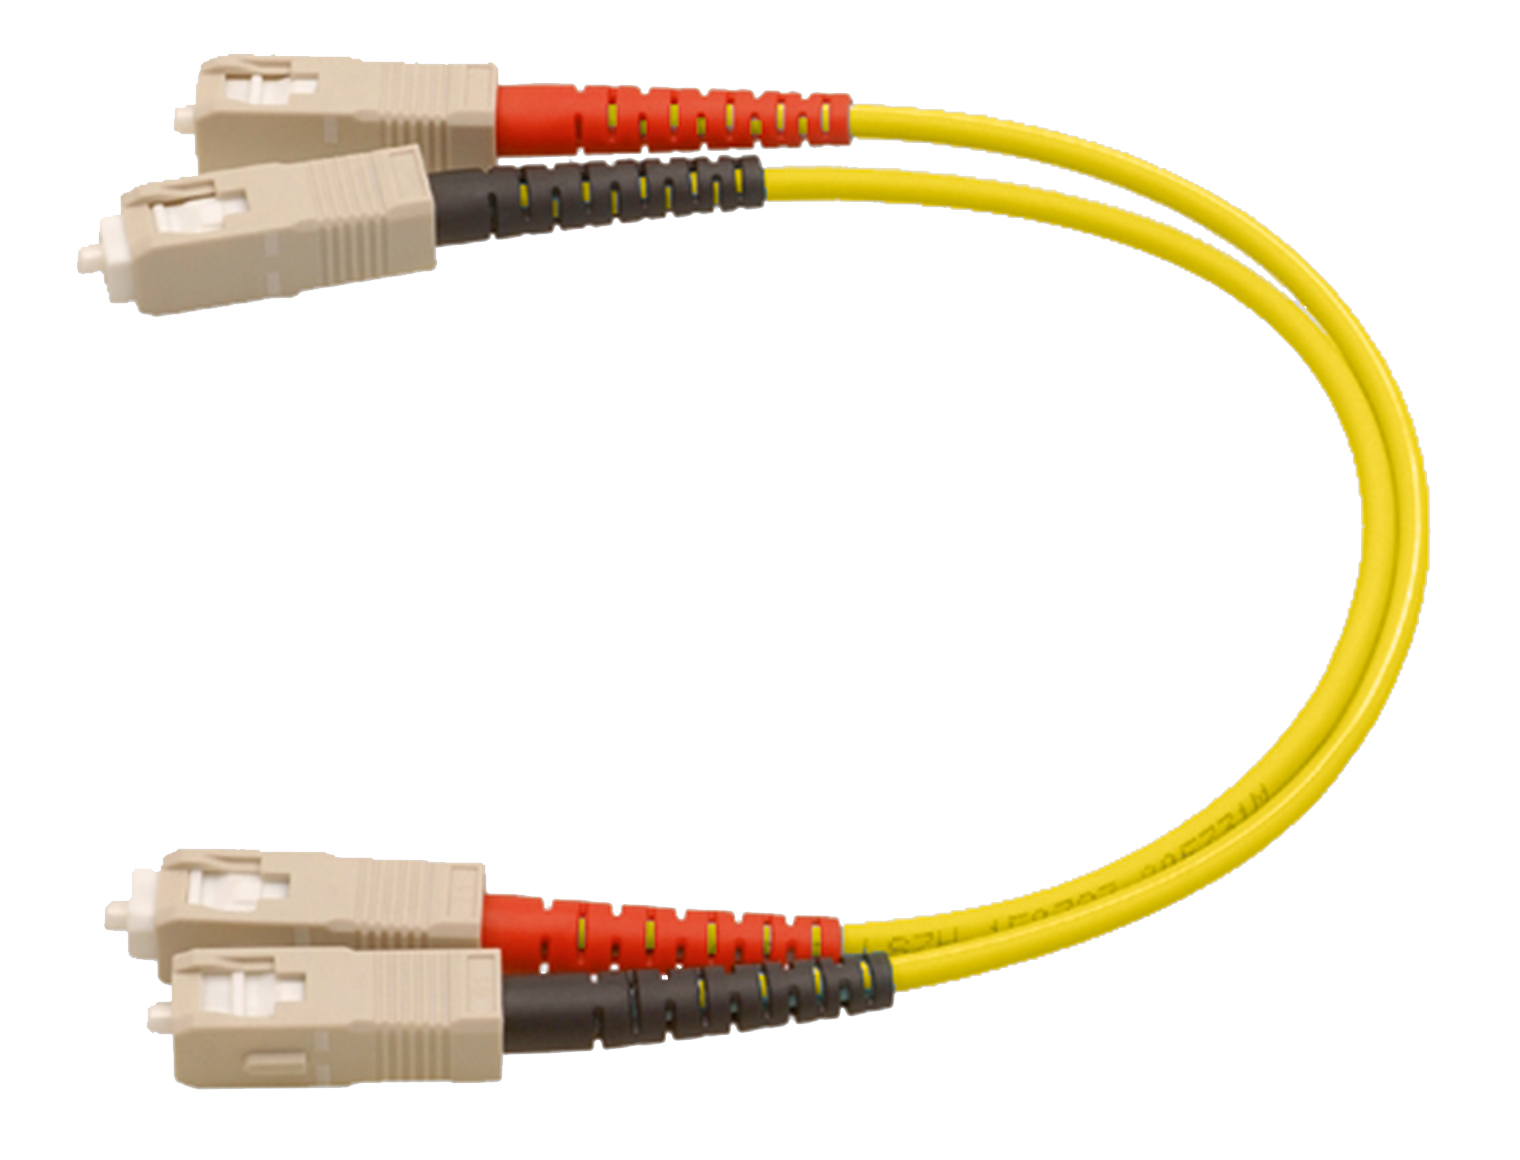 HELUCOM-CONNECTING-SYSTEMS-Jumper-cable-I-VH-2x1-SC-SC-M803162